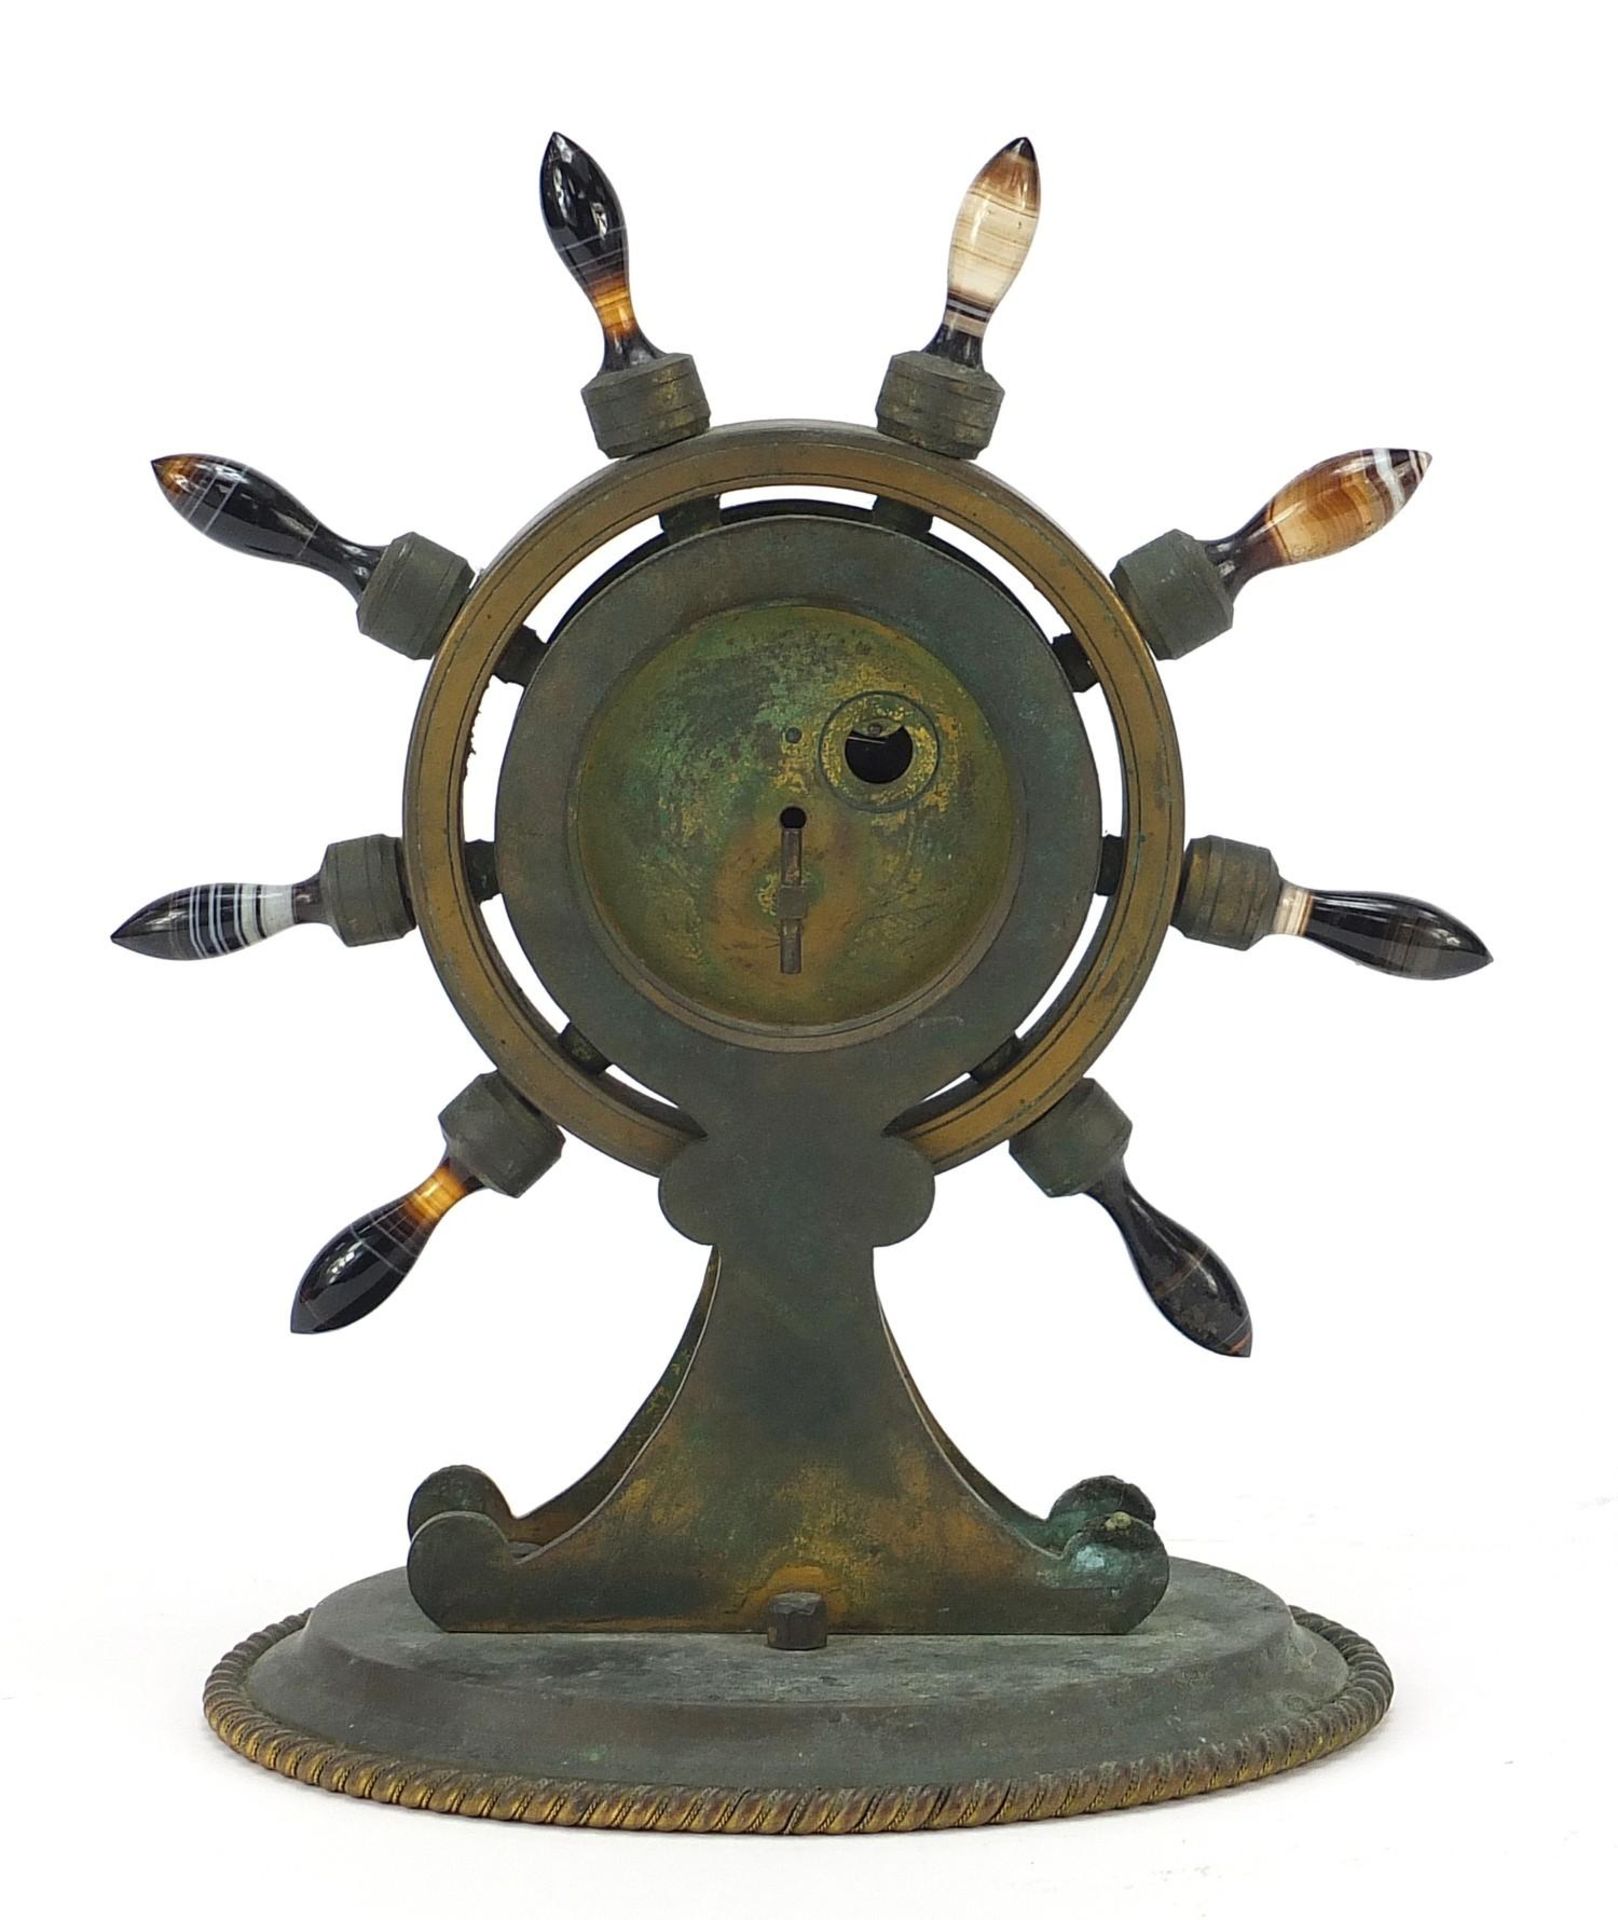 19th century gilt bronze ship's wheel design mantle clock with Scottish agate handles and Roman - Image 4 of 6